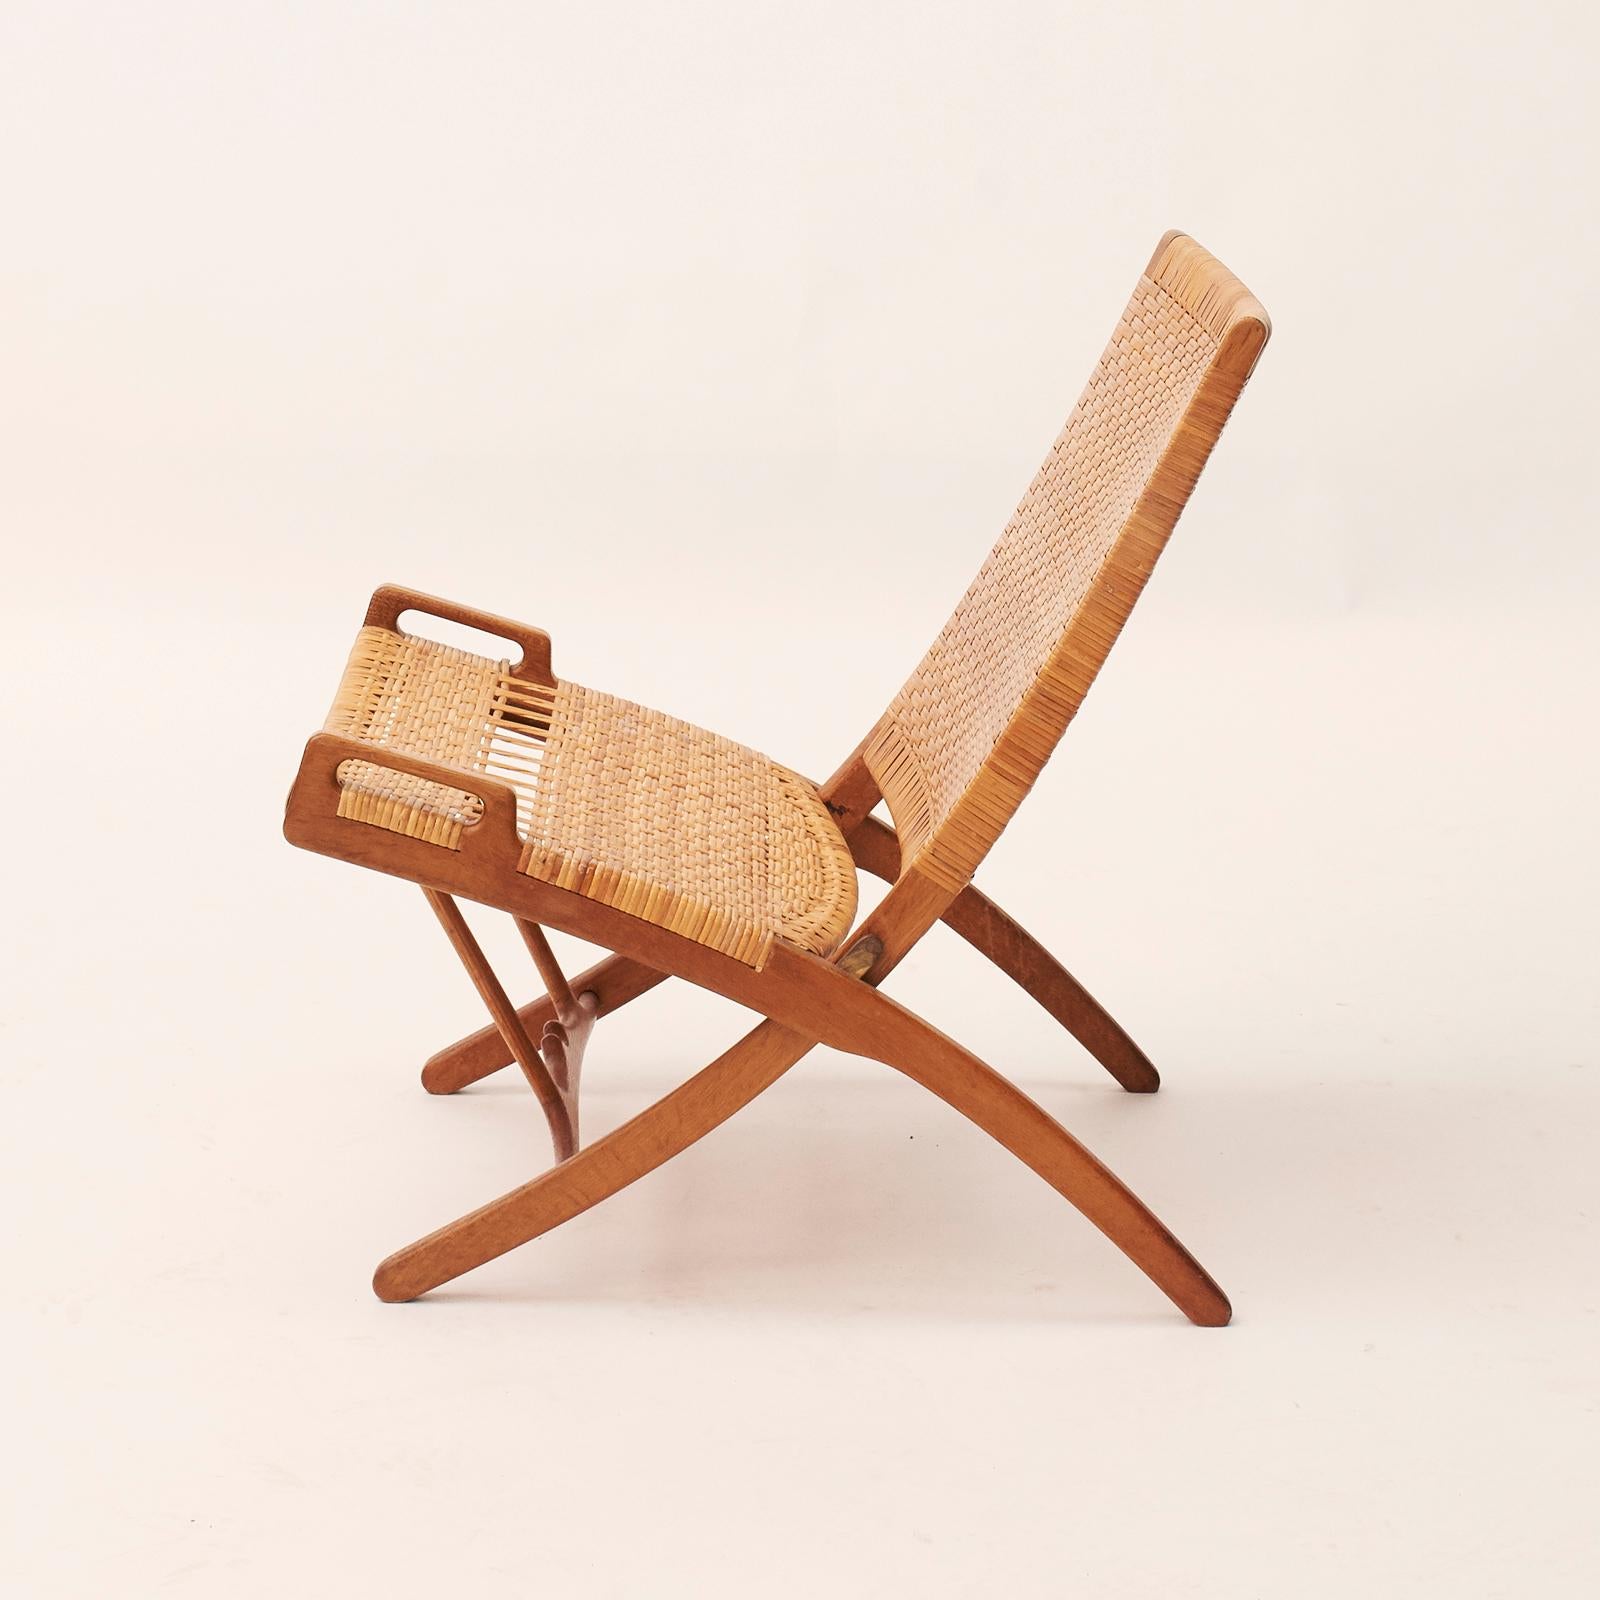 Hans J. Wegner 1914-2007. Model HJ512, 'Kaminstol'. Folding chair in oak, woven cane seat and back. Designed in 1949. Produced by Johannes Hansen, Model JH-512.
The model was presented at The Copenhagen Cabinetmakers’ Guild Exhibition at